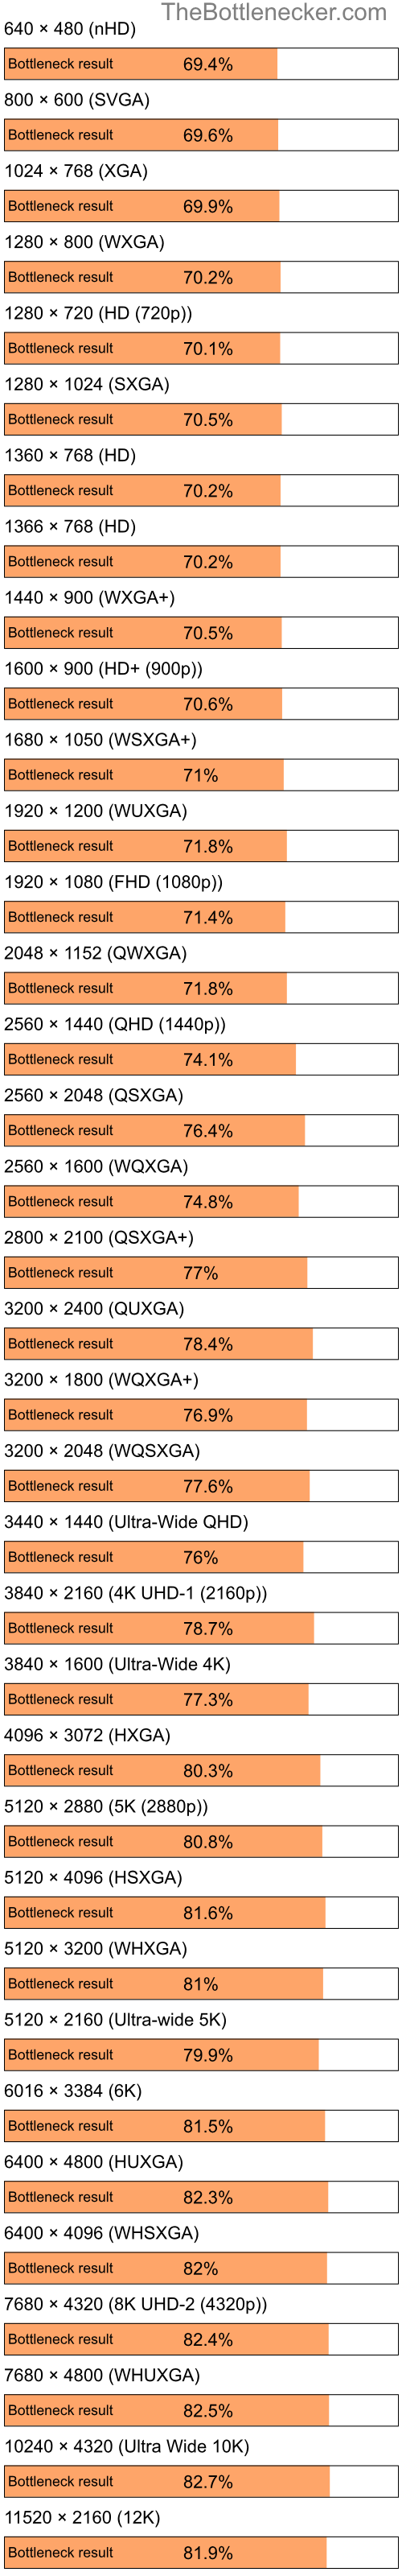 Bottleneck results by resolution for Intel Celeron M 420 and NVIDIA GeForce GT 320M in Graphic Card Intense Tasks